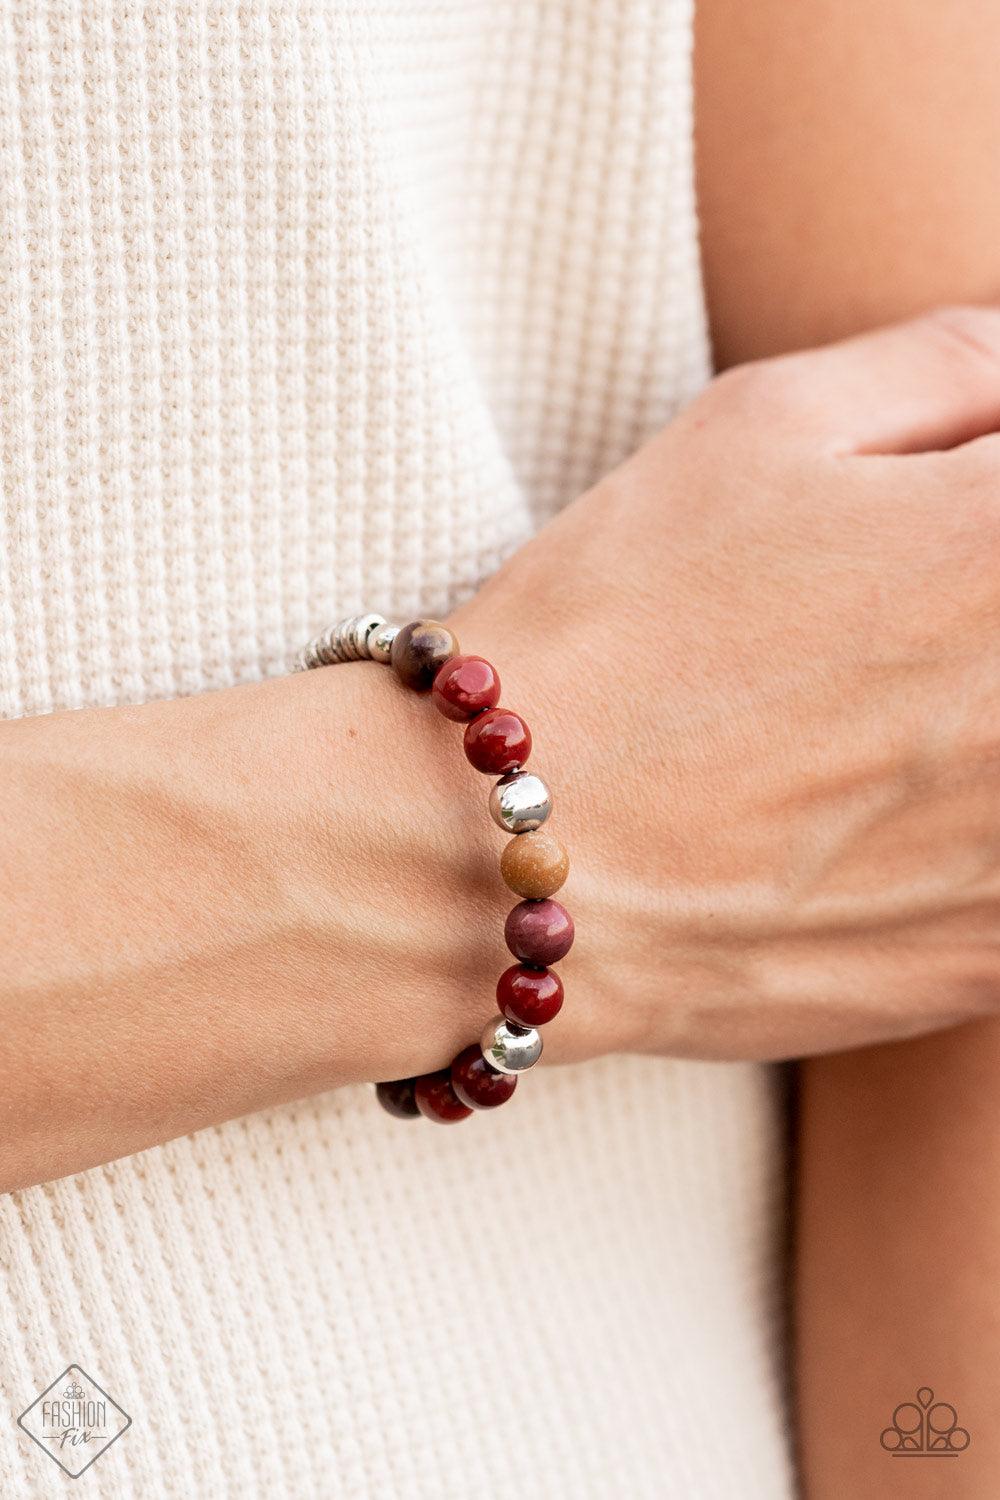 Paparazzi Accessories Pure Prana - Multi Accented with shiny silver beads, a collection of polished multicolored stone beads are fashioned into a wire cuff bracelet. The earthy stones give way on each end to a number of silver rings enclosed by small silv